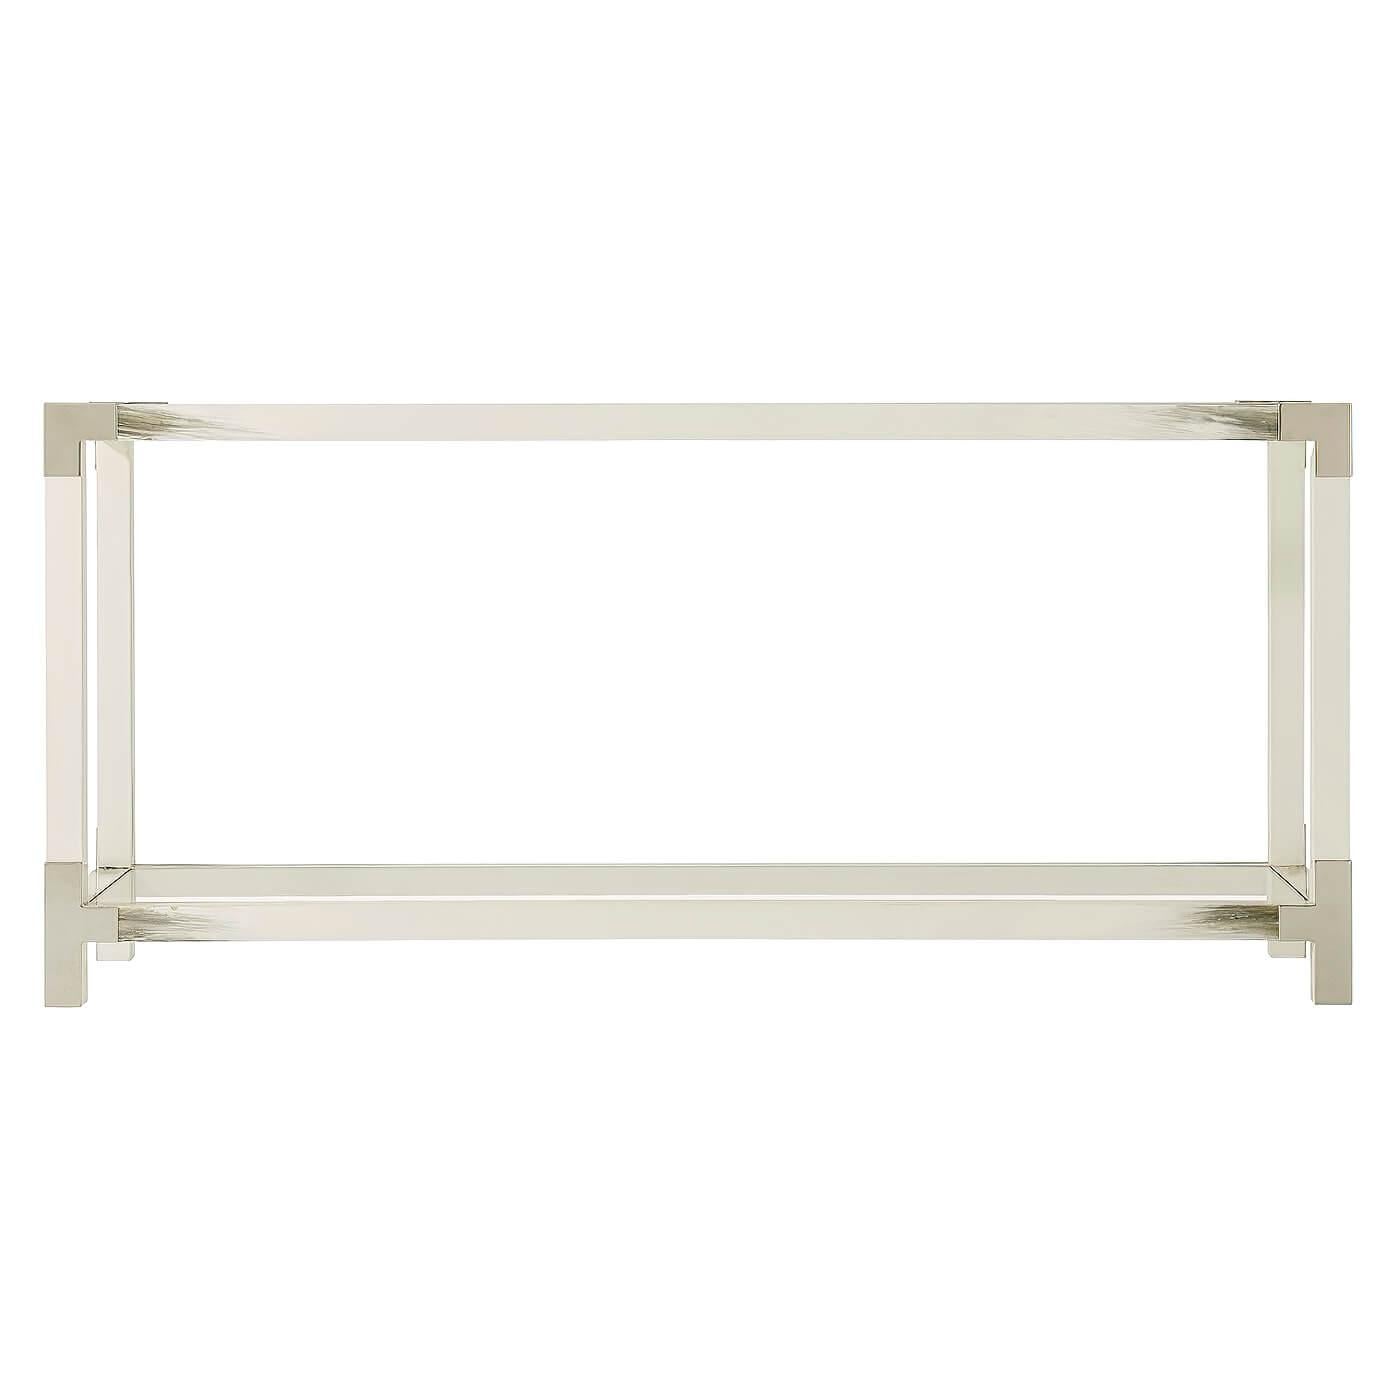 Modern hand painted faux horn wooden frame console table with stainless steel edge corners and tempered glass inset top and lower shelf.
Dimensions: 65